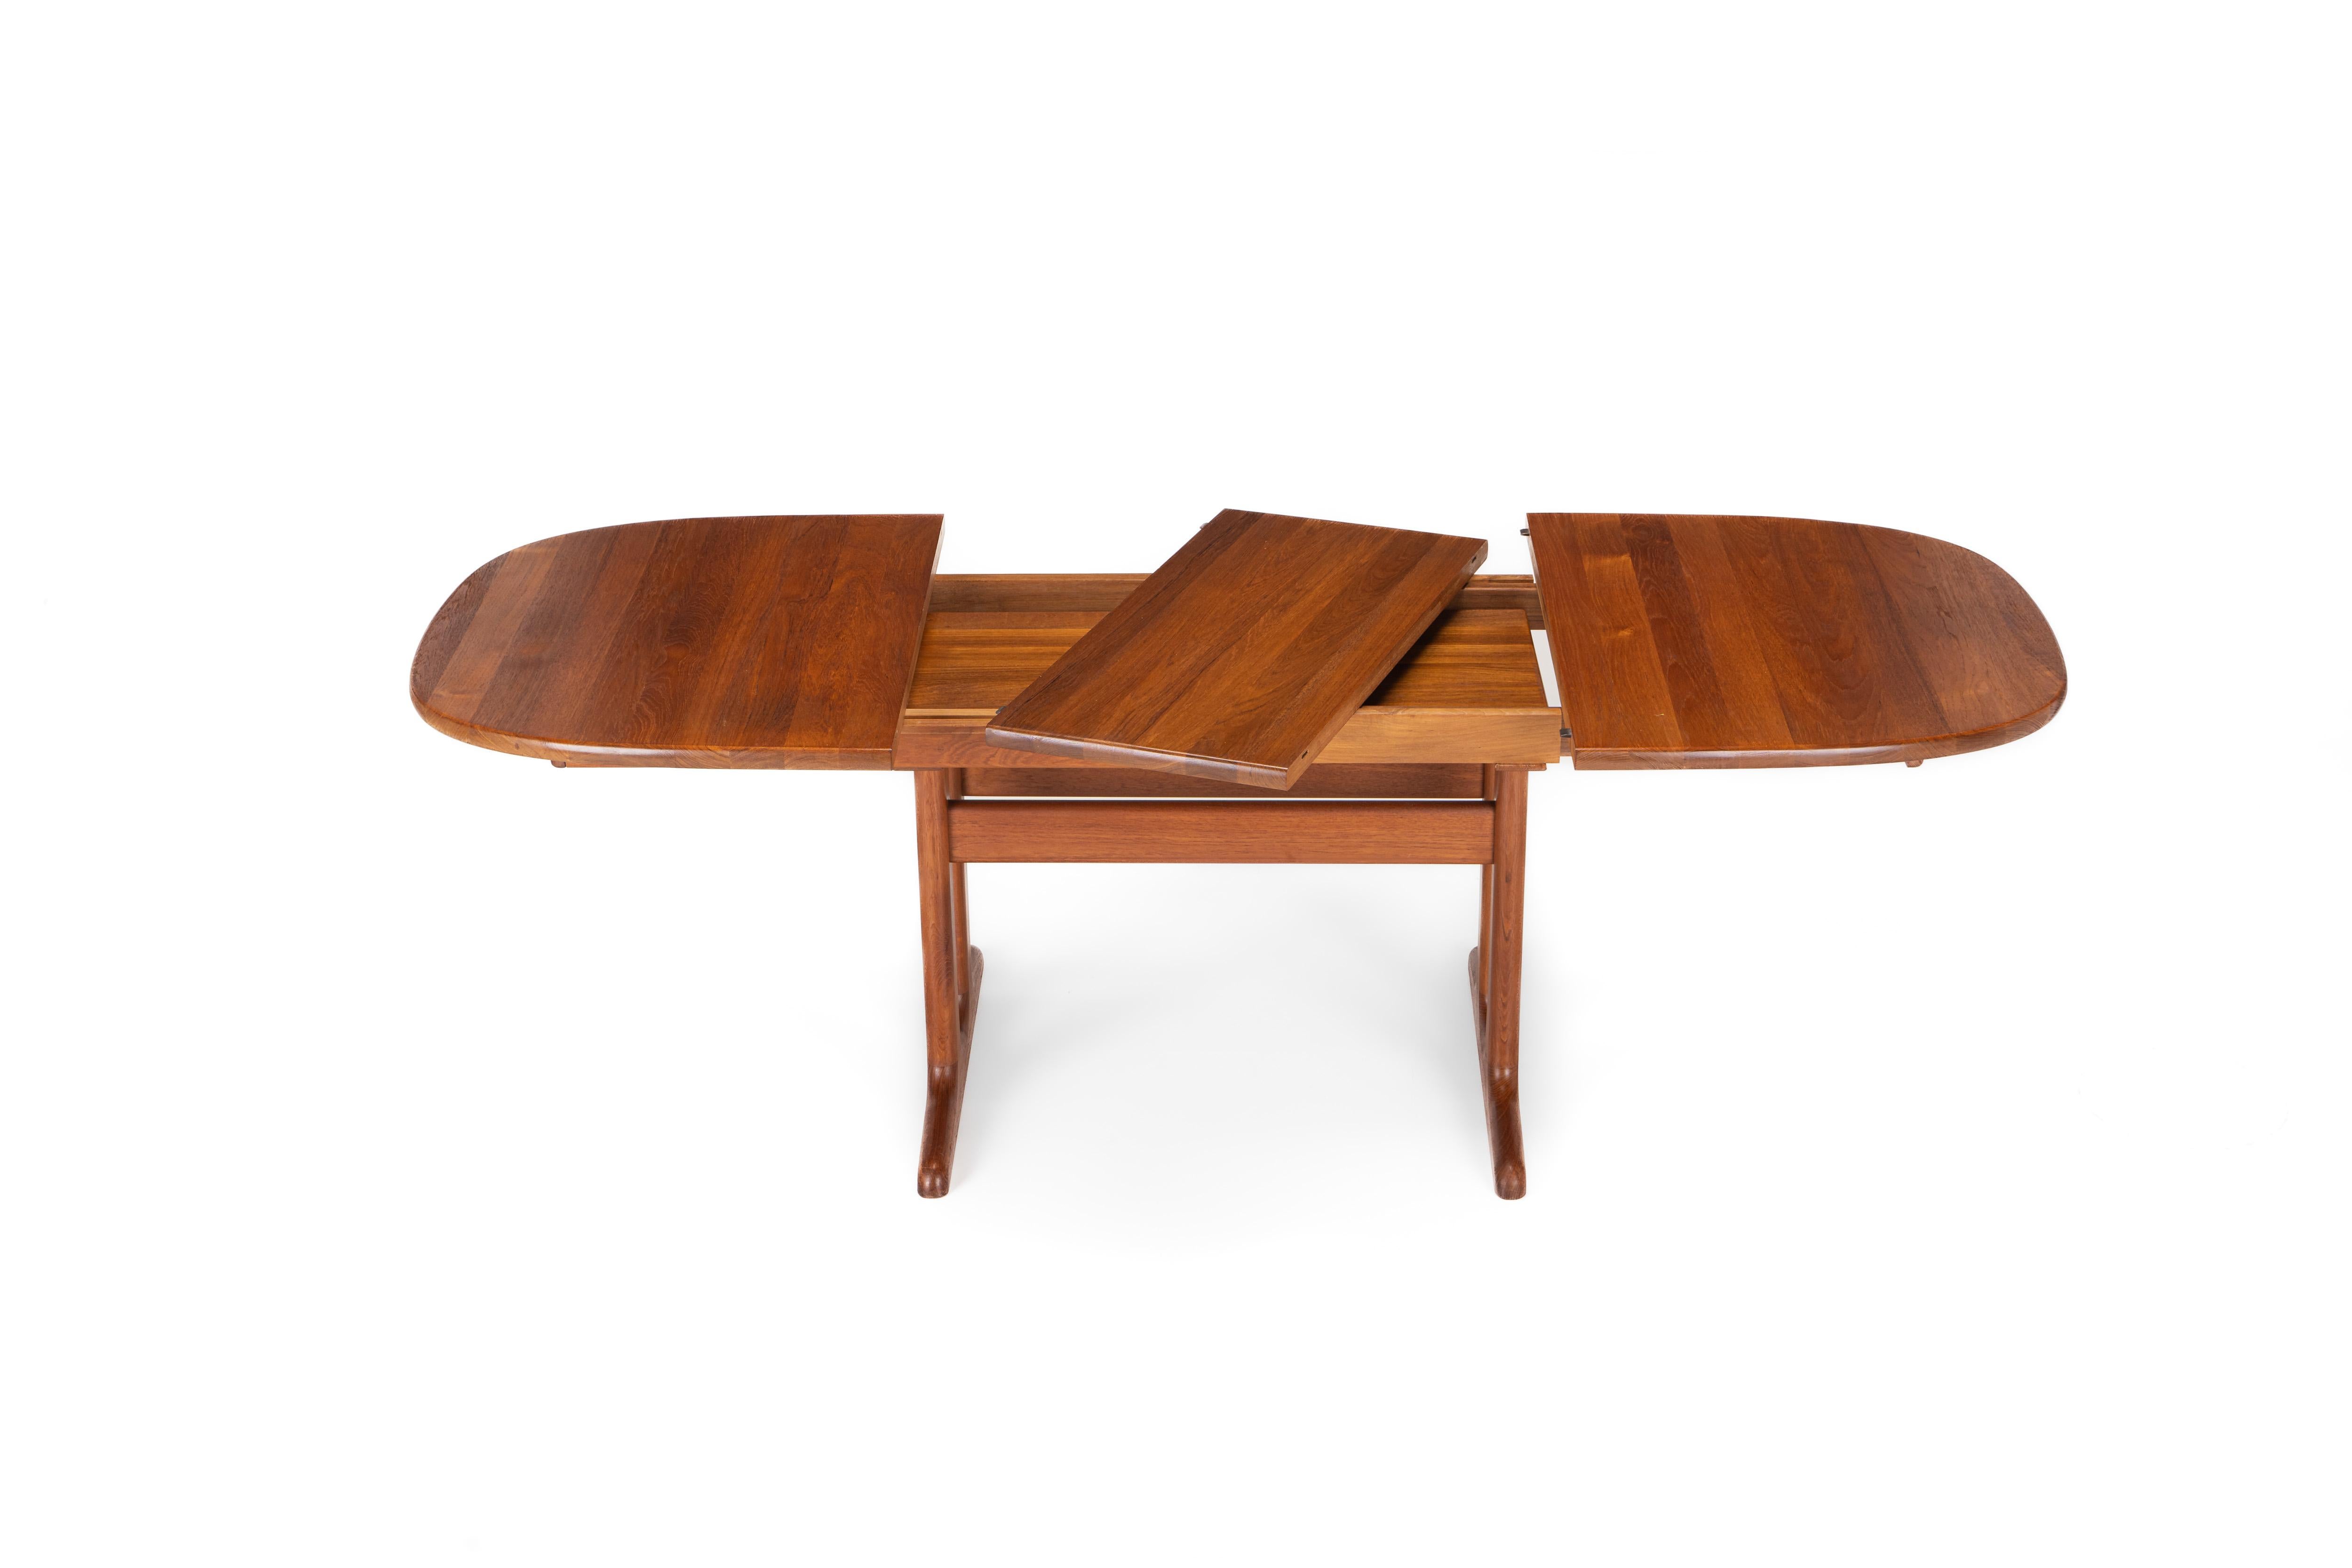 Beautiful extendable dining table produced by Glostrup, Denmark. The table is made of solid teak and in very good restored condition. Marked by the producer.